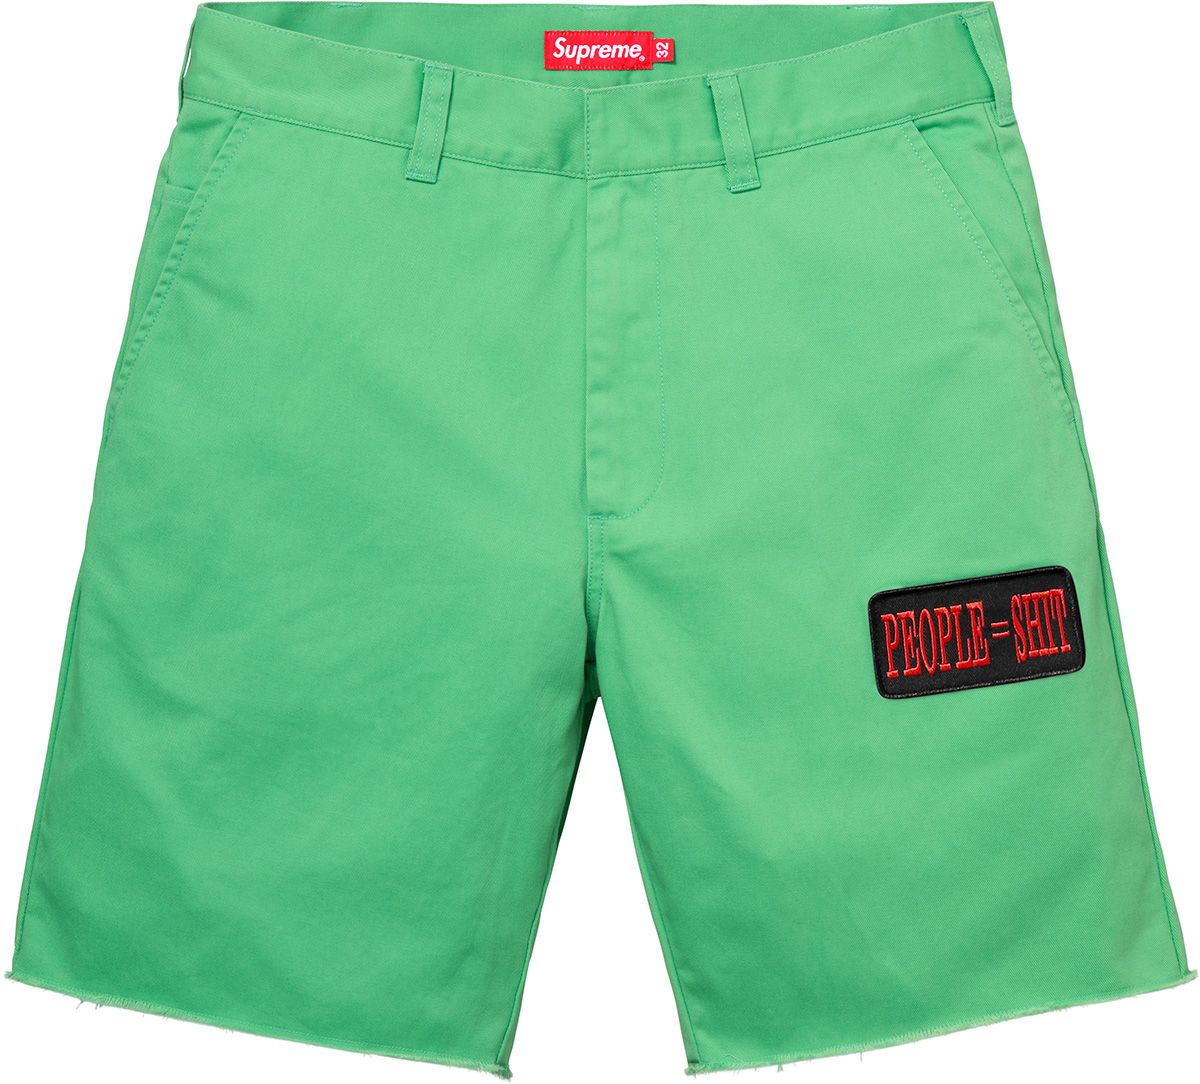 People = Shit Work Short - Spring/Summer 2018 Preview – Supreme